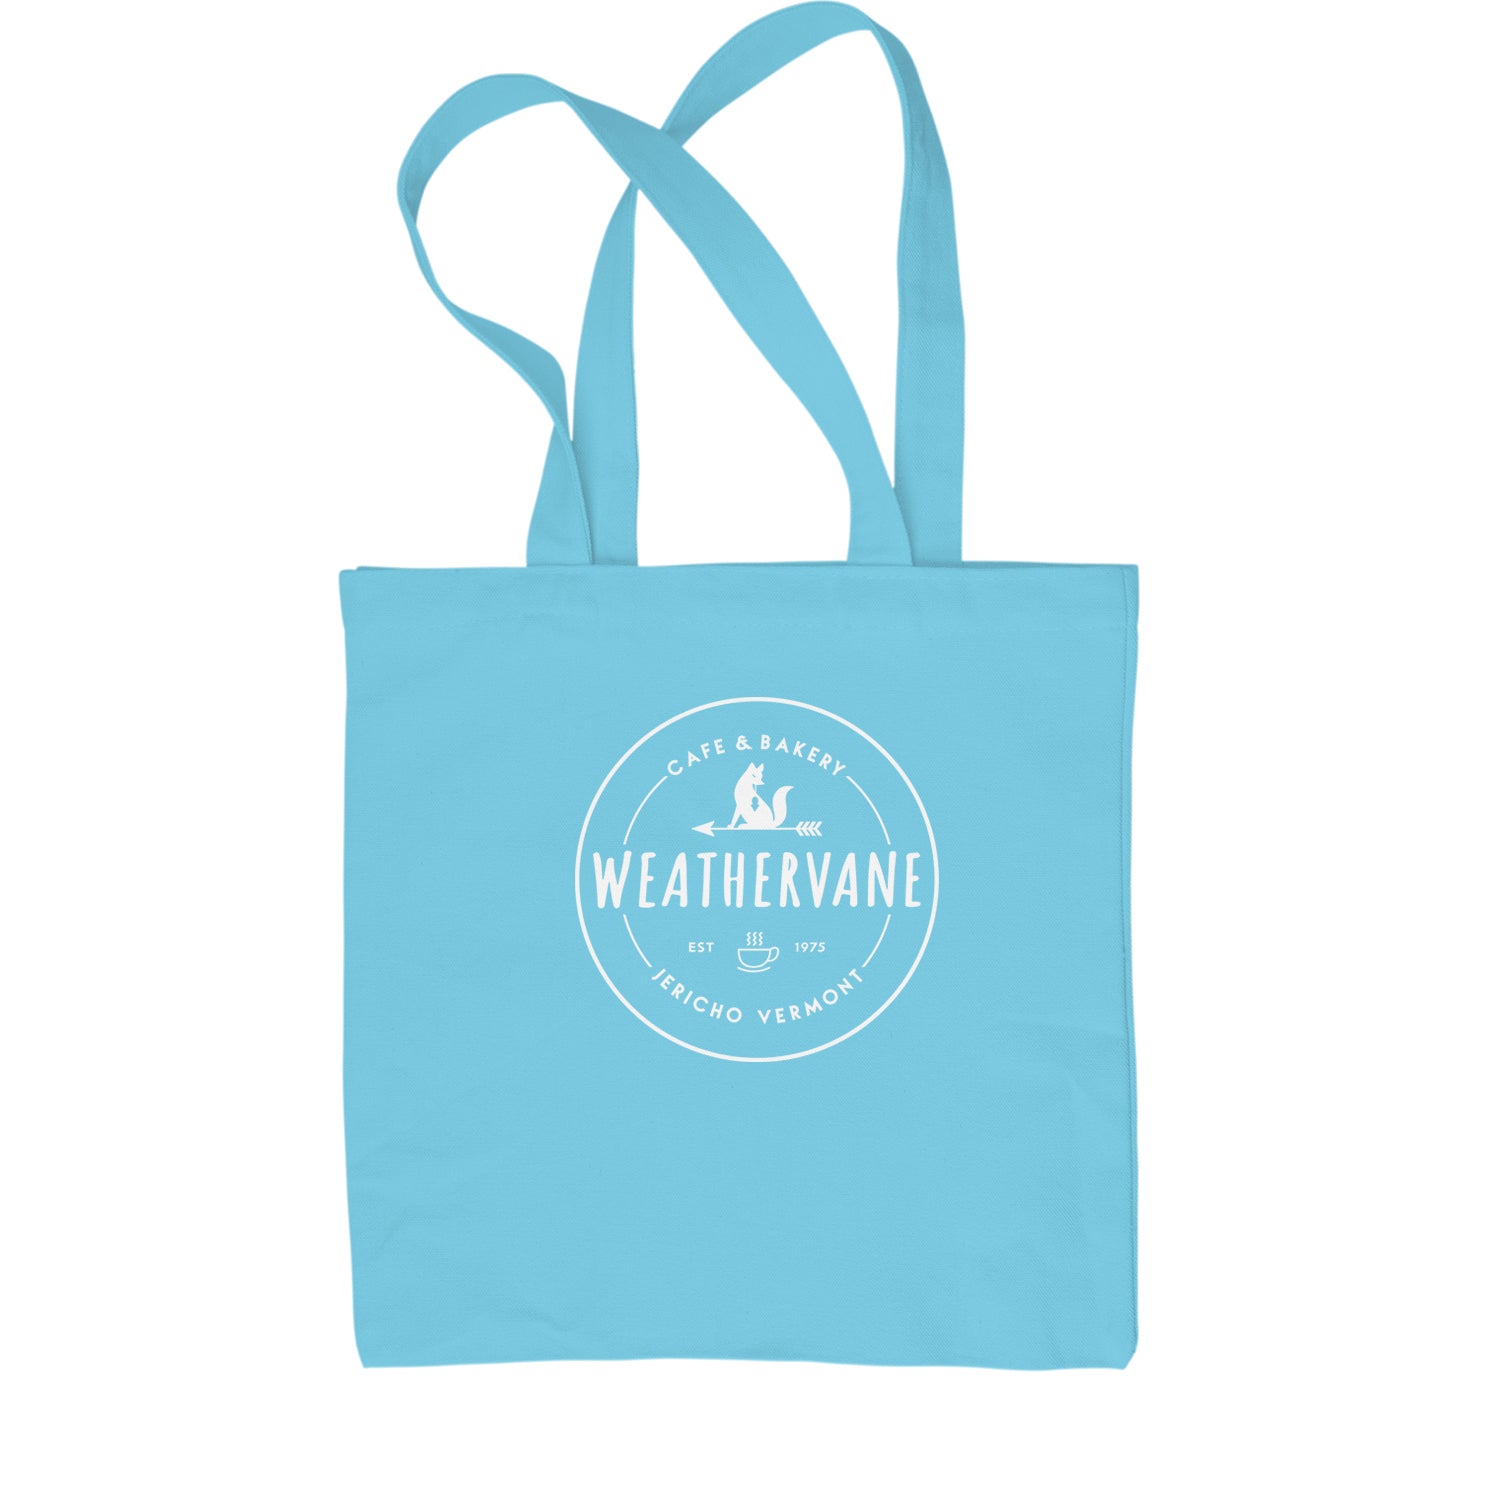 Weathervane Coffee Shop Shopping Tote Bag academy, jericho, more, never, vermont, Wednesday by Expression Tees